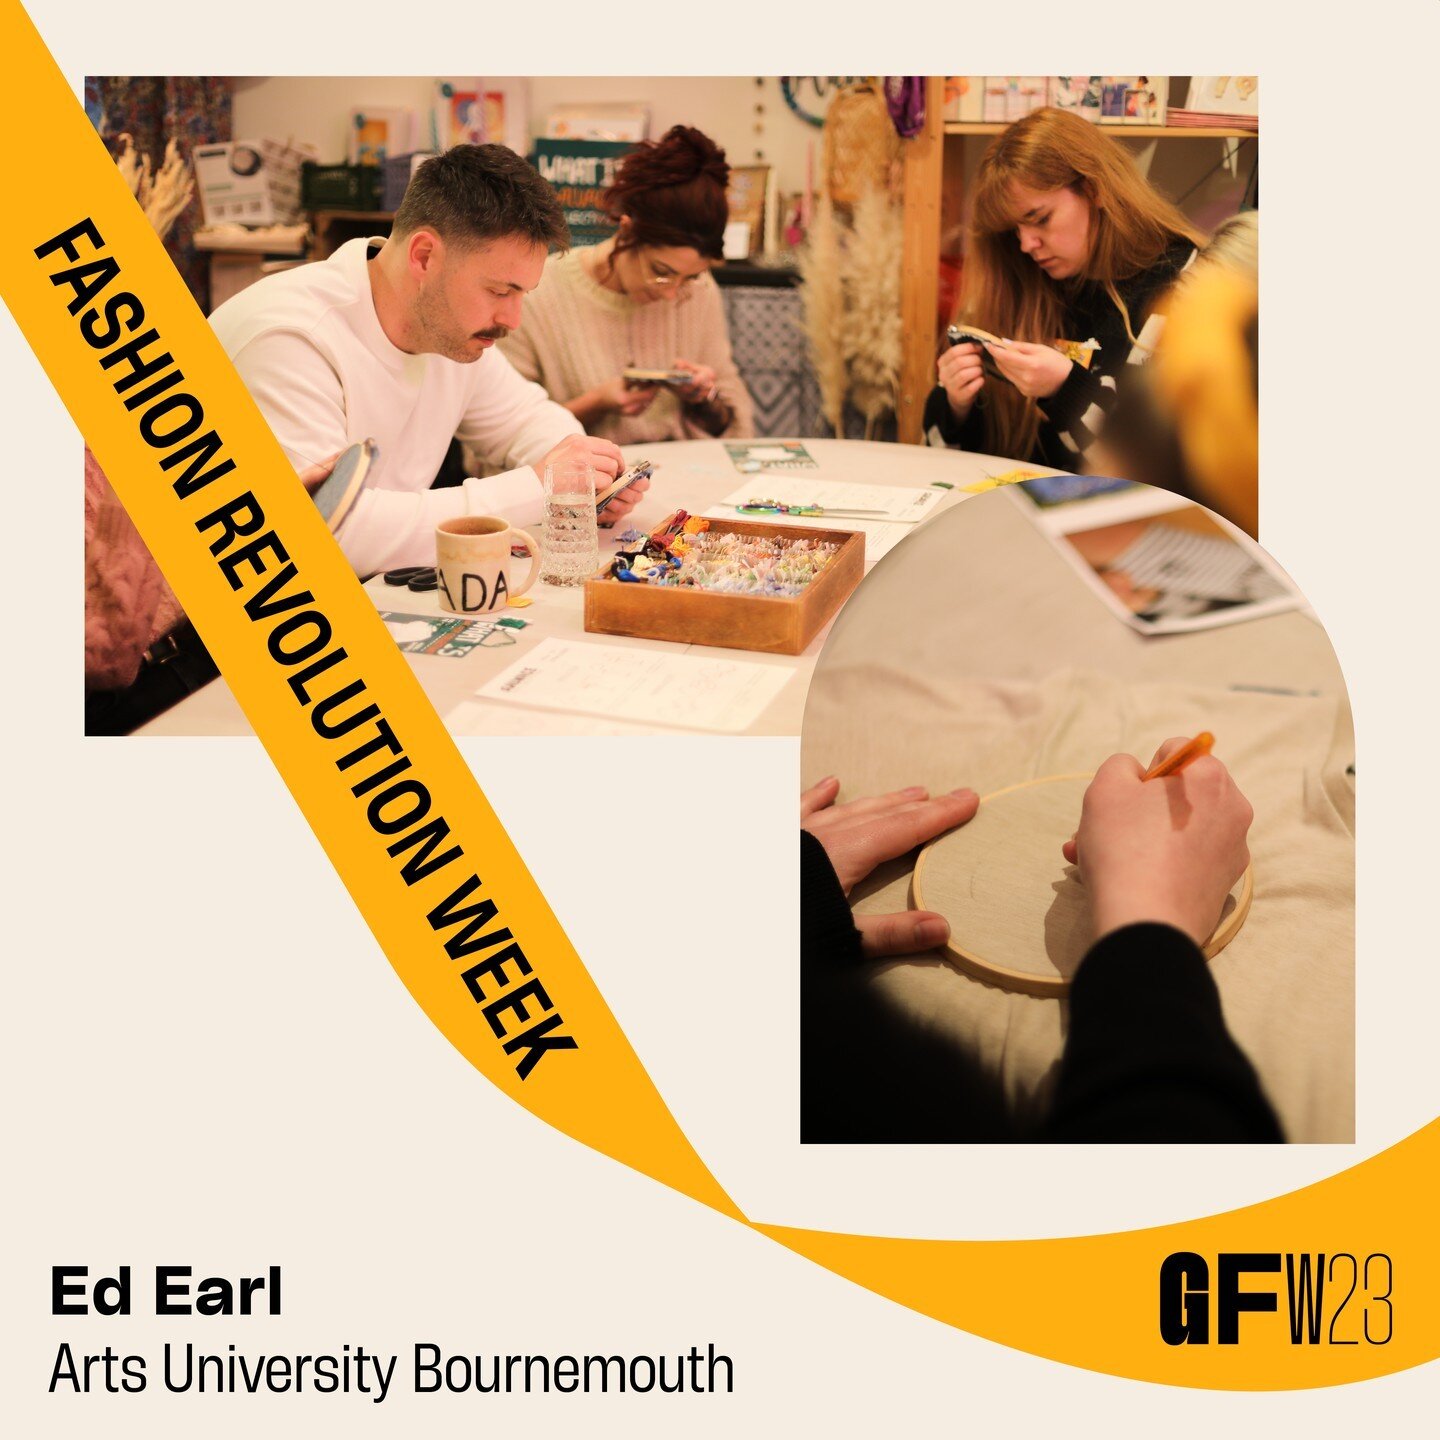 To celebrate #FashionRevolutionWeek we're highlighting student work that centres around fashion activism 👏

Ed Earl is a Fashion Branding and Communications student at Arts University Bournemouth and they have set up @wesalvagecollective which offer